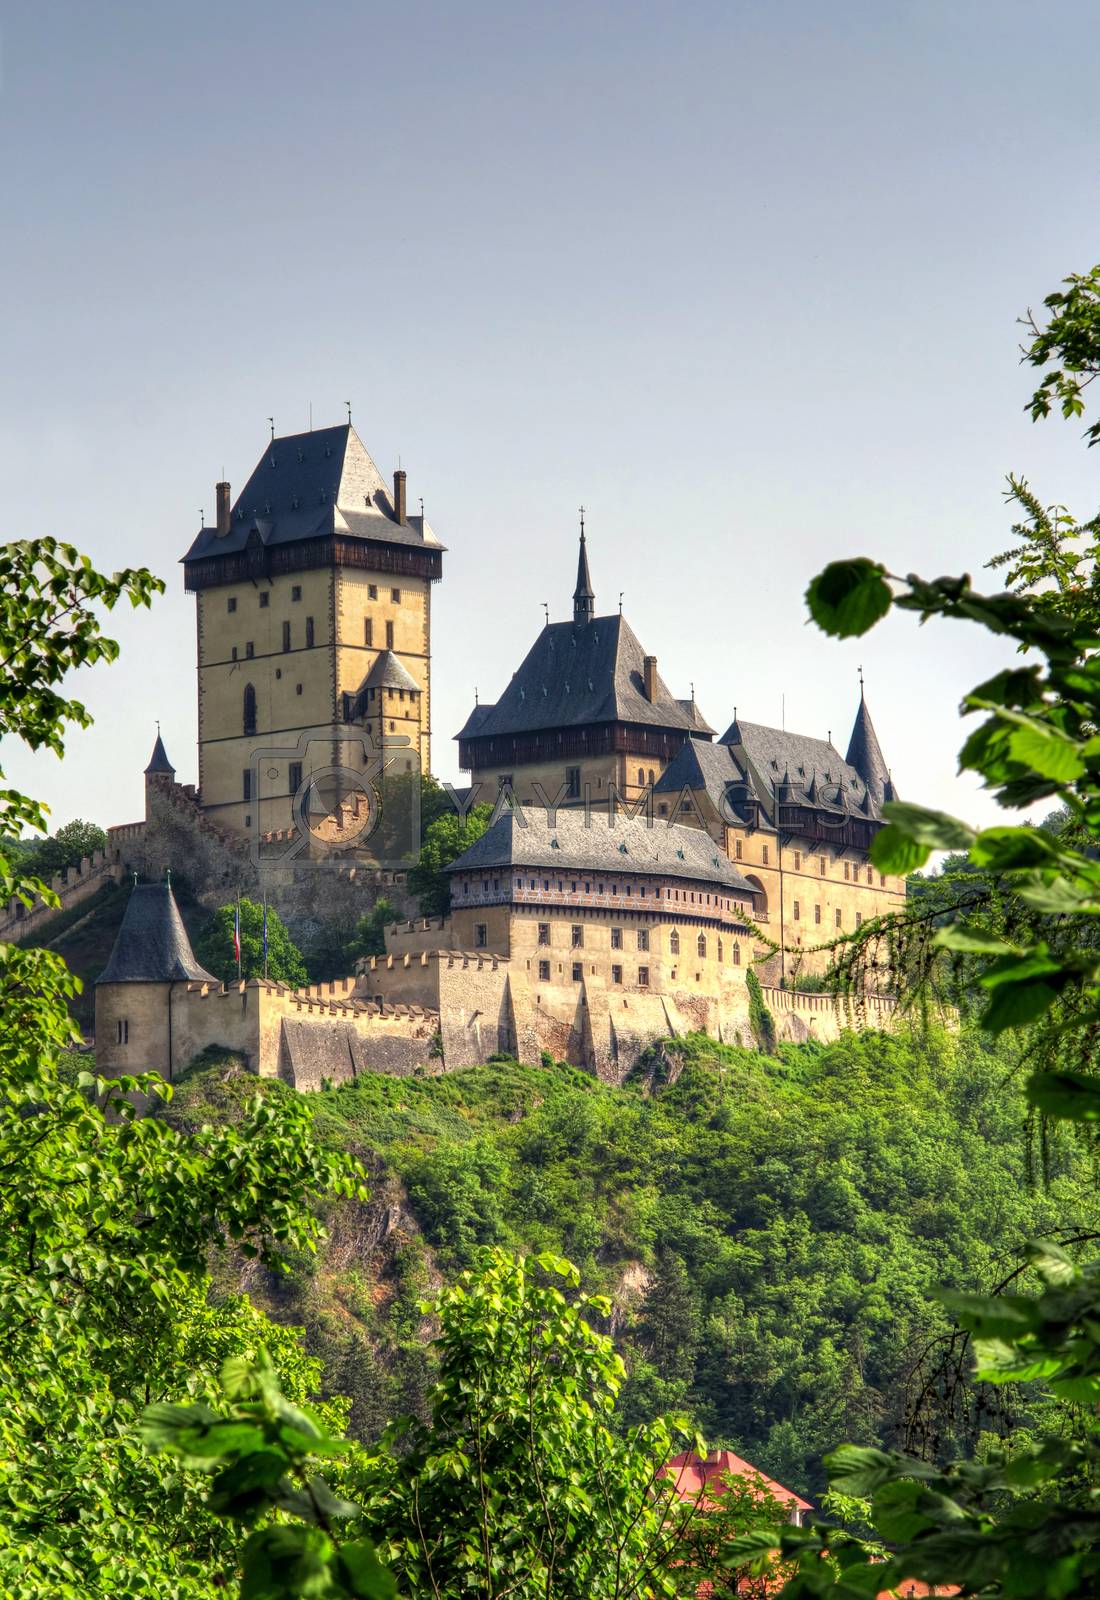 Royalty free image of karlstejn castle by Mibuch